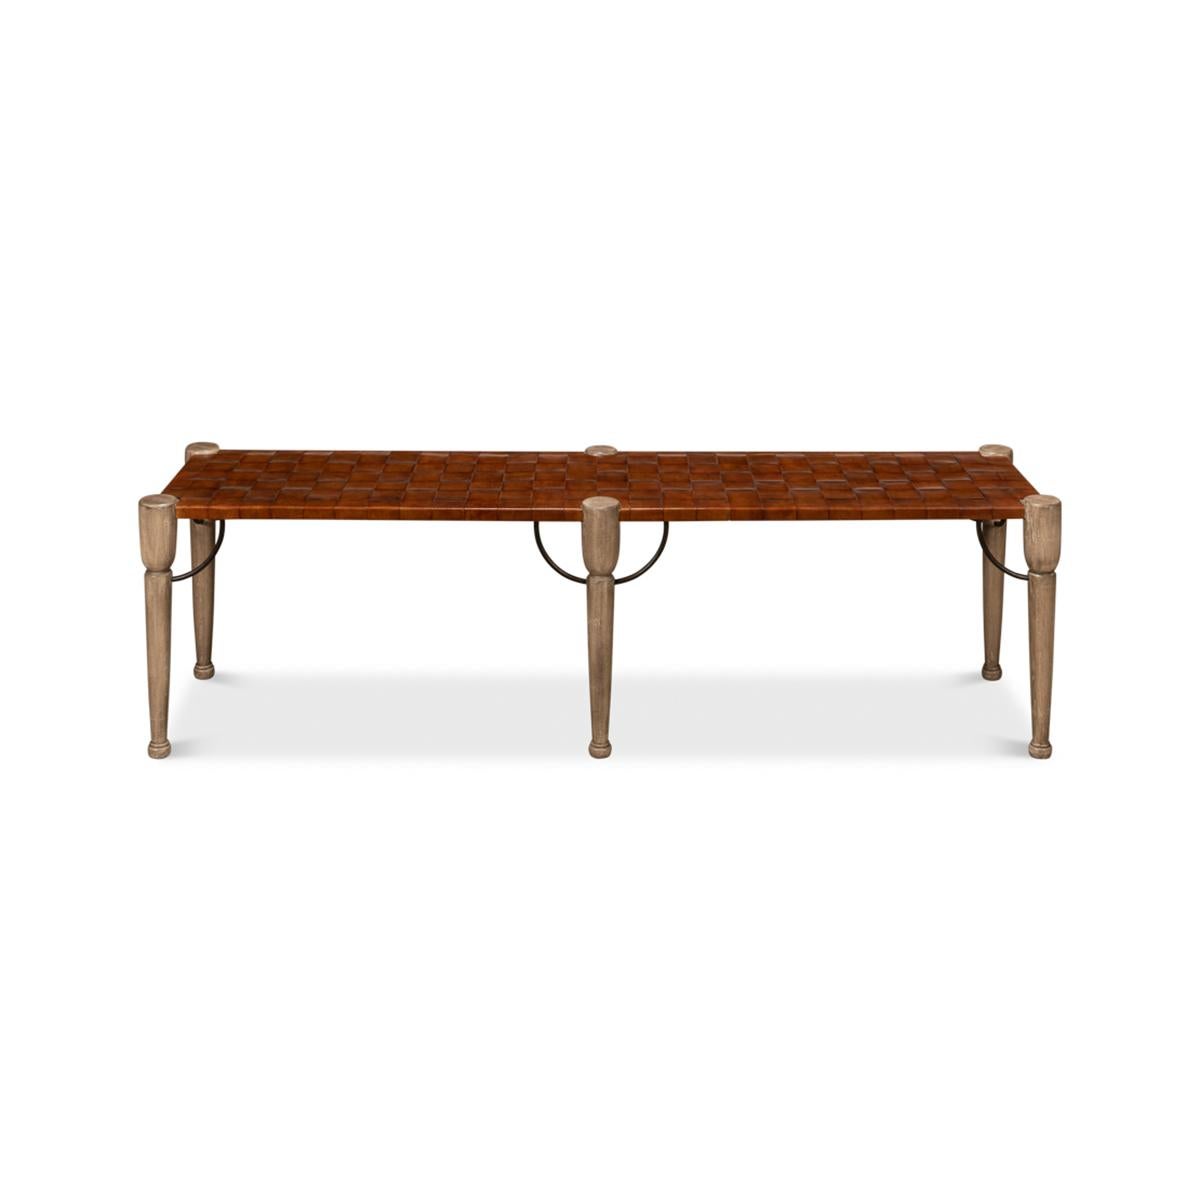 Modern woven bench with a brown woven leather seat raised on turned and tapered naturally finished legs, with iron brackets.

Dimensions: 68